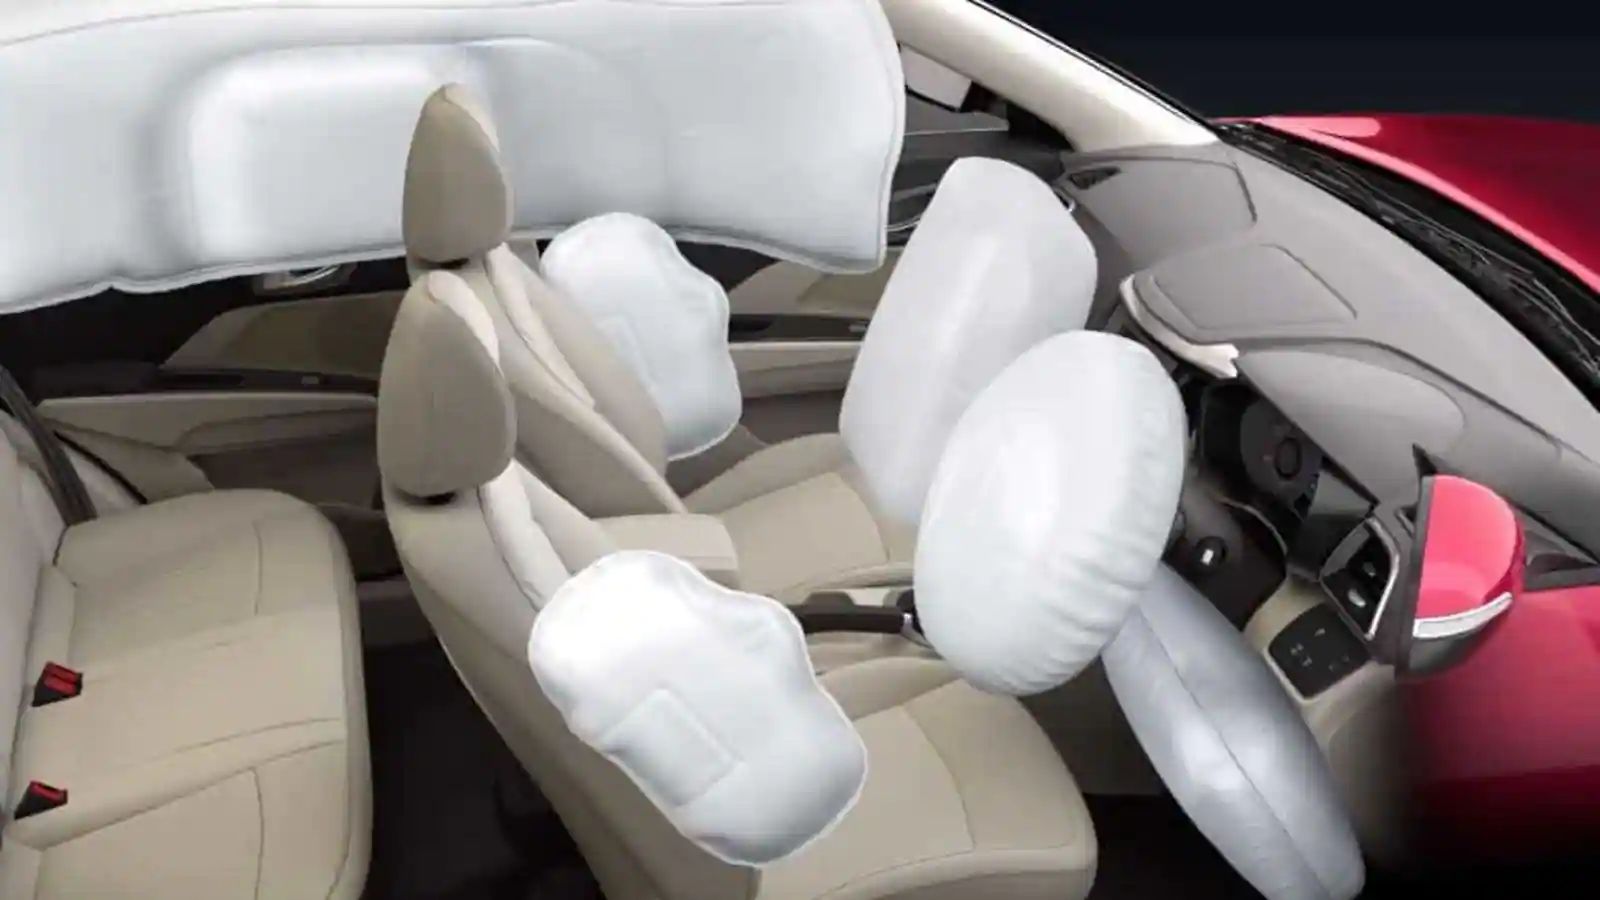 Airbags; how do they work?